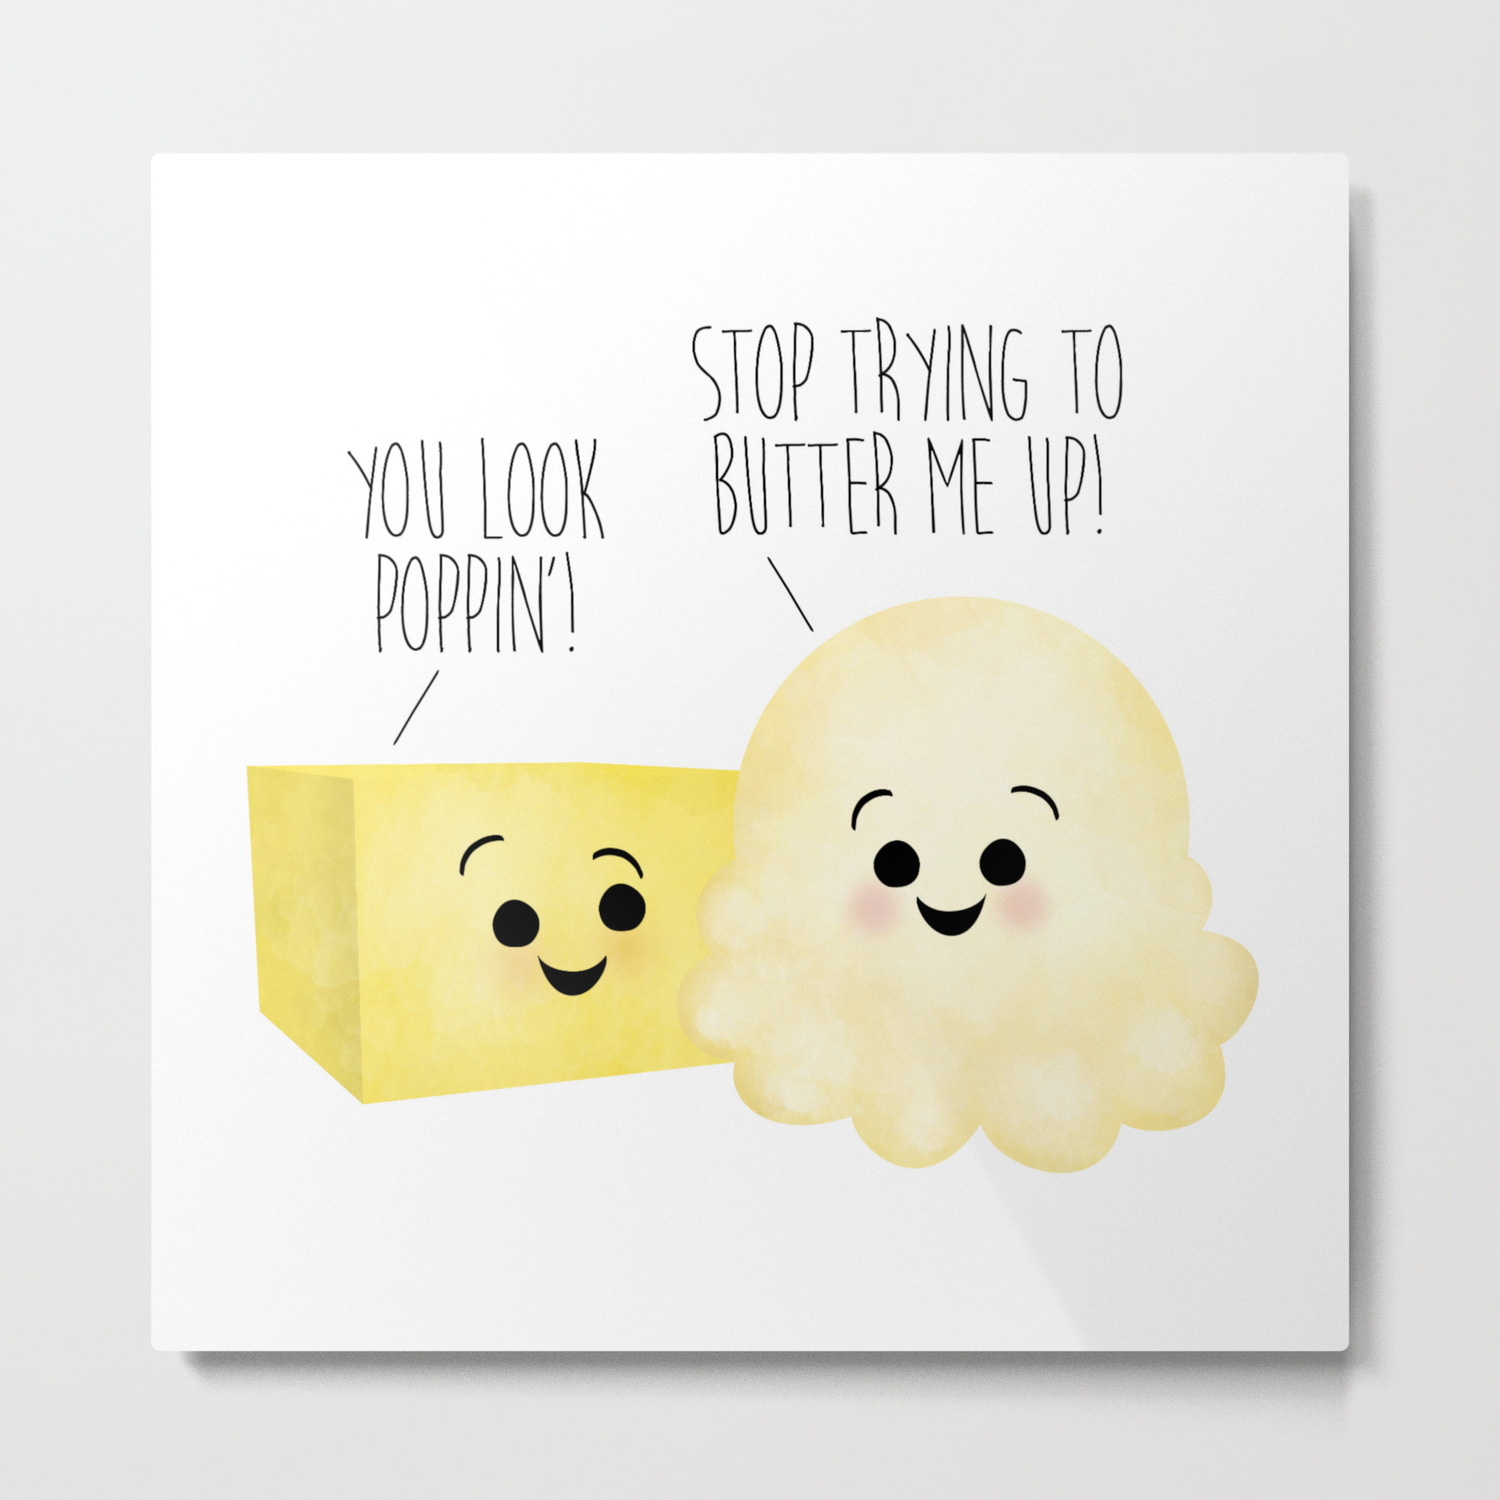 Butter Me Up